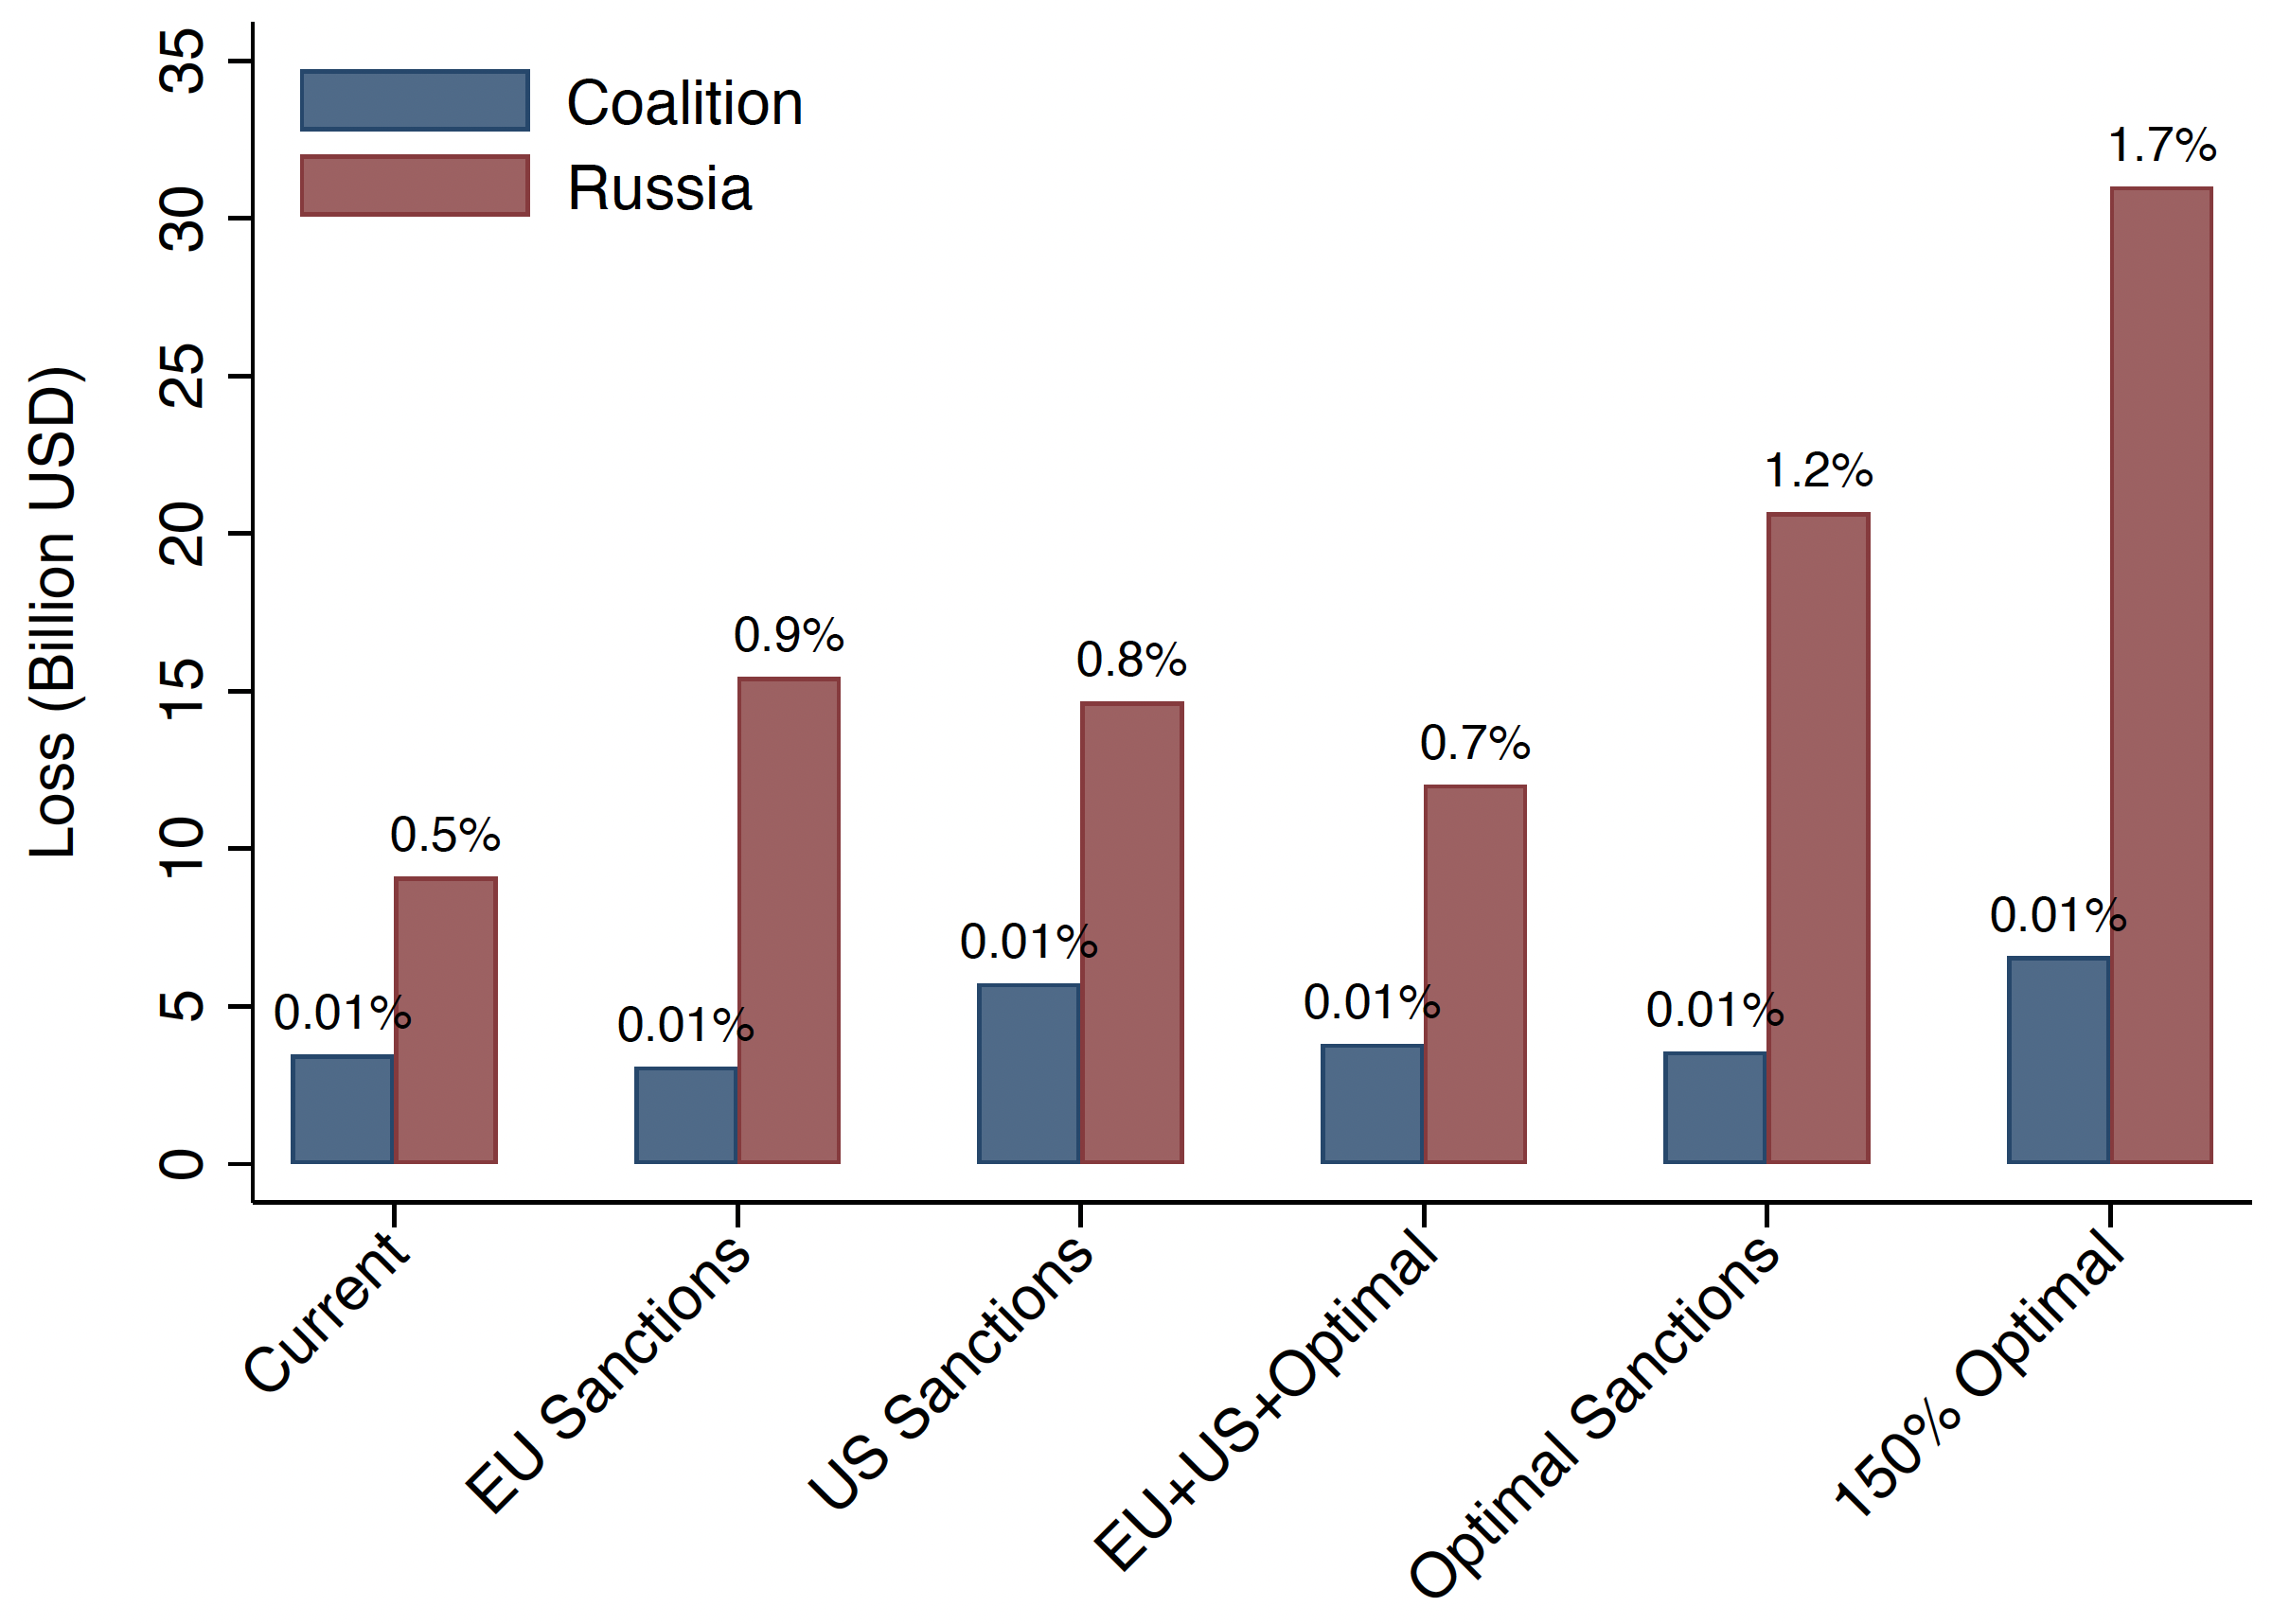 Figure 3 Economic losses for Russia and the coalition for six different sanctions scenarios